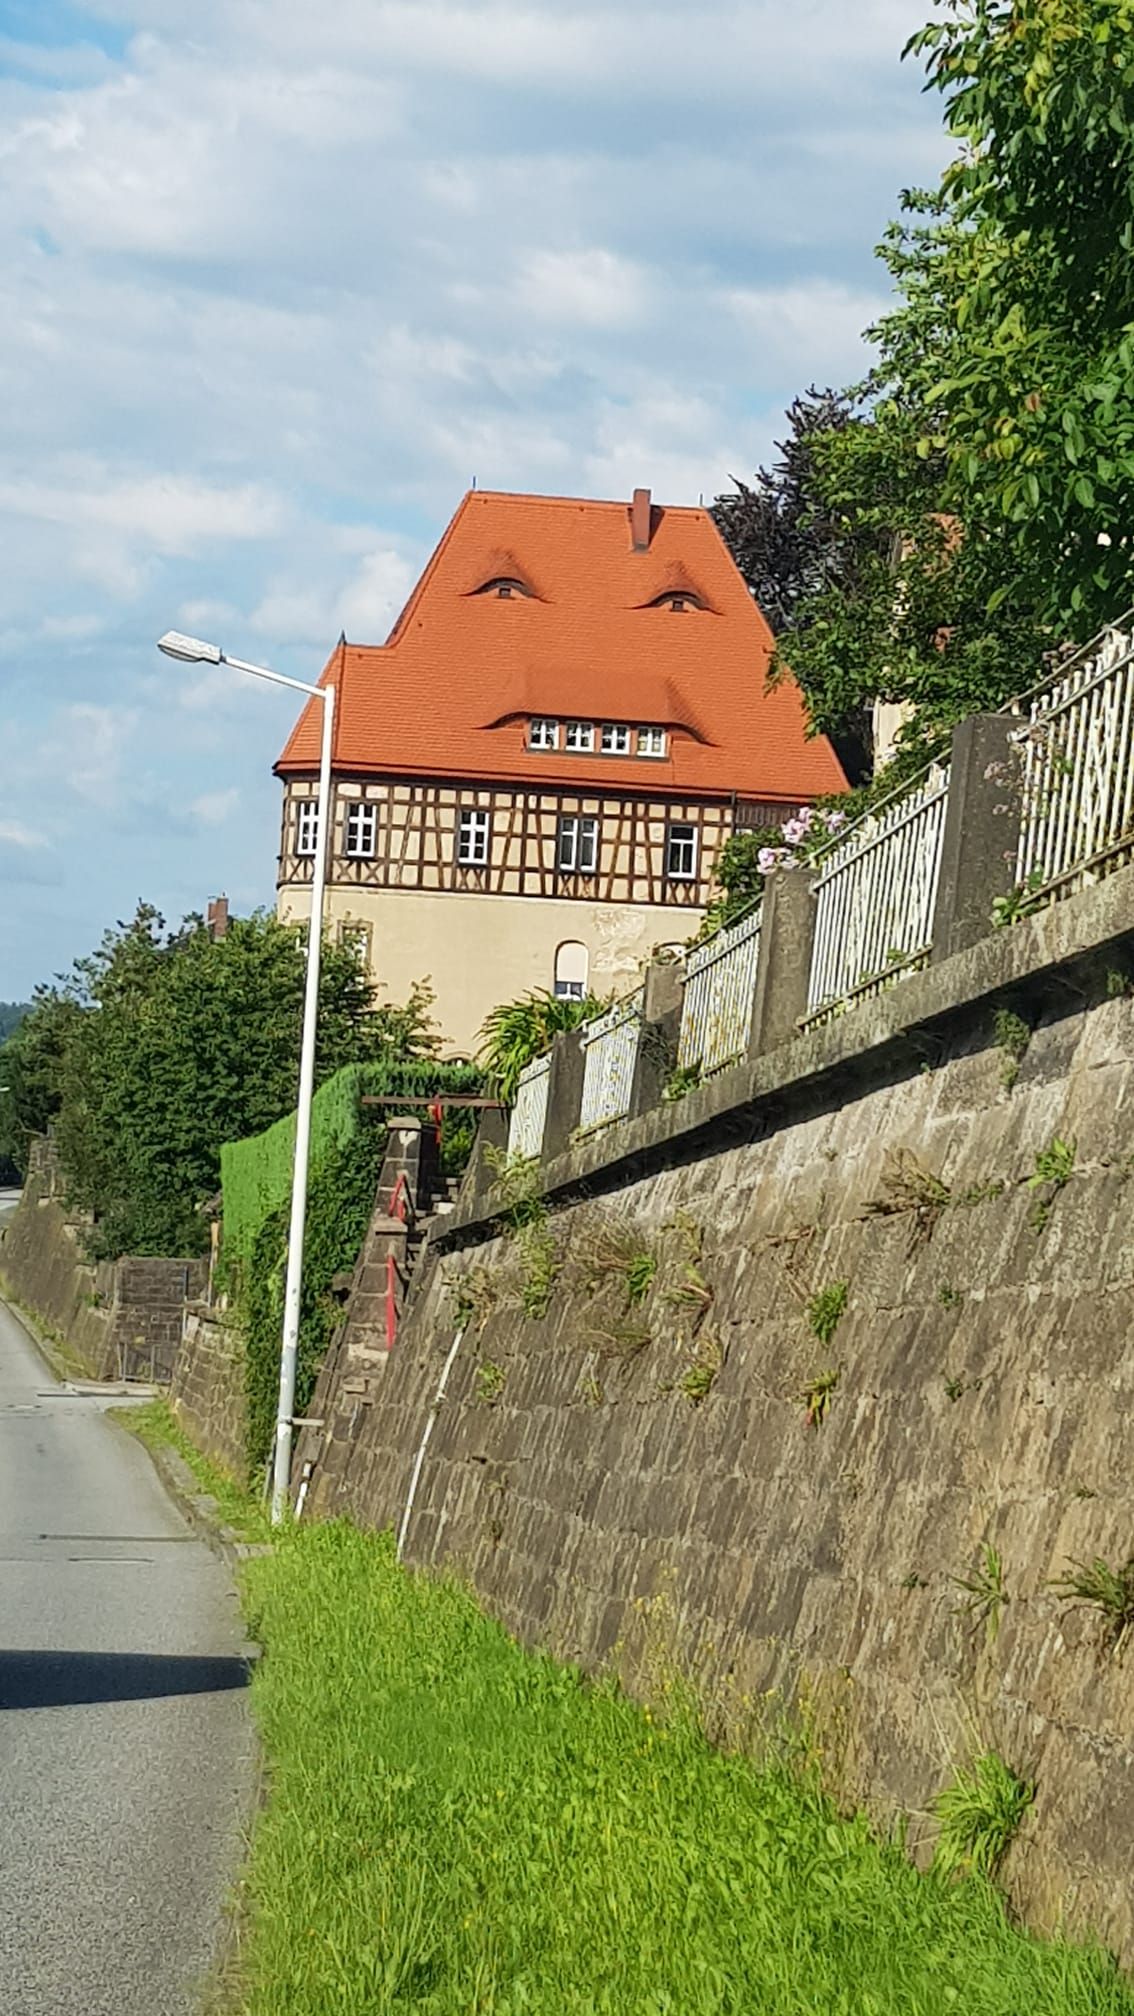 Interesting roof style in Germany